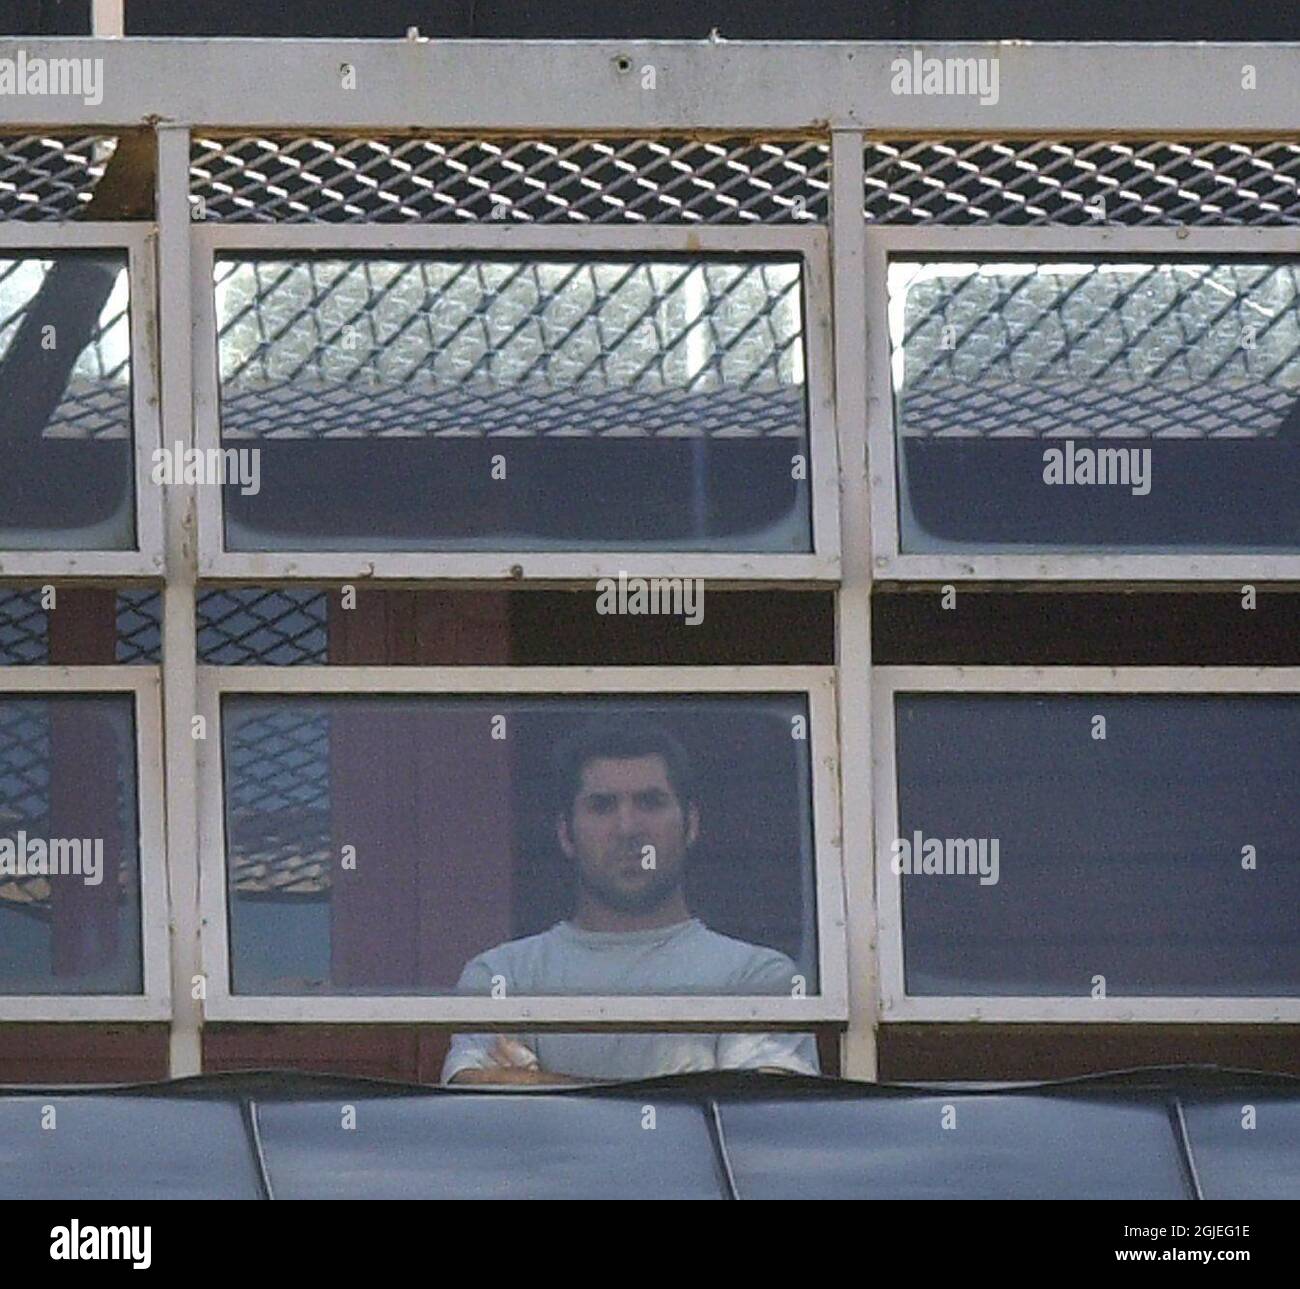 Canadian ice hockey player Yvon Corriveau, who plays for German league club Eisbaren Berlin, looking out from the exercise yard at a remand prison in Kristianstad, Sweden. Corriveau and his teammate Brad Bergen were arrested after being accused of sexually assaulting a local girl during their pre-season tour. Stock Photo